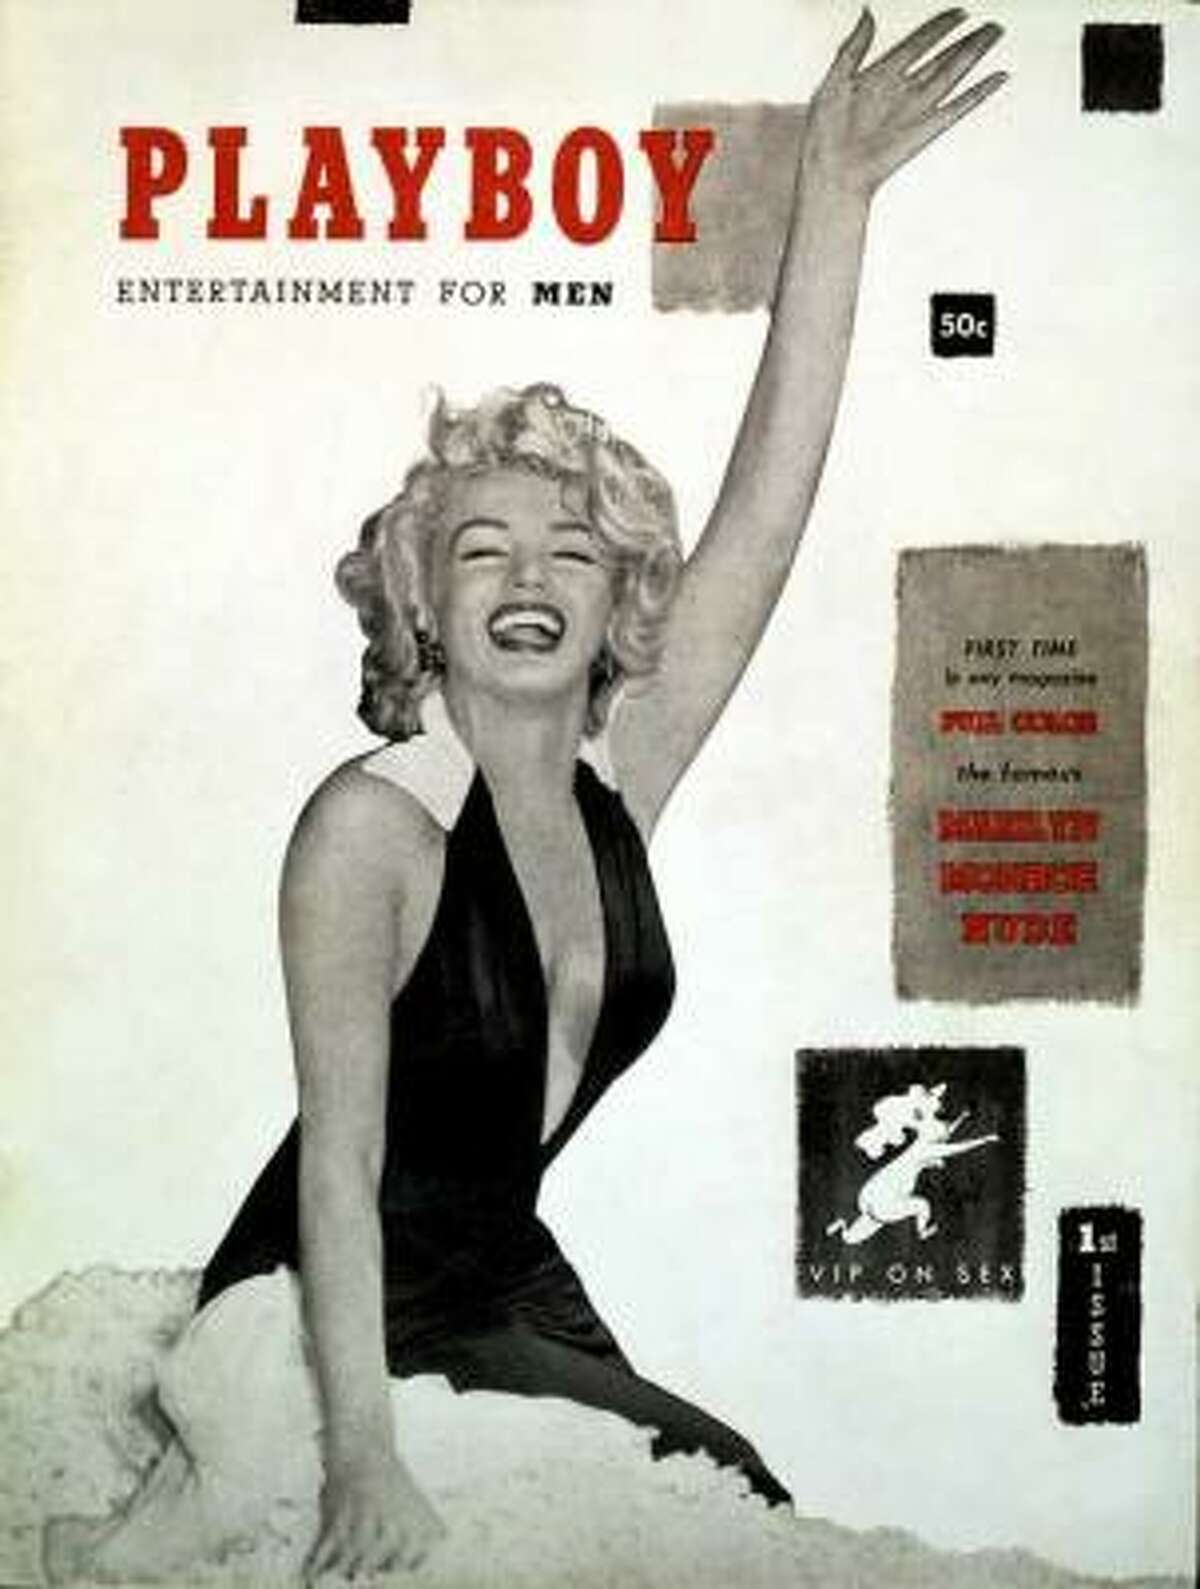 The first cover of Playboy featured Marilyn Monroe, though the shots were from a calendar shoot and she never actually posed for Playboy. It was undated as Hugh Hefner was unsure if there would be a second. December 1953.